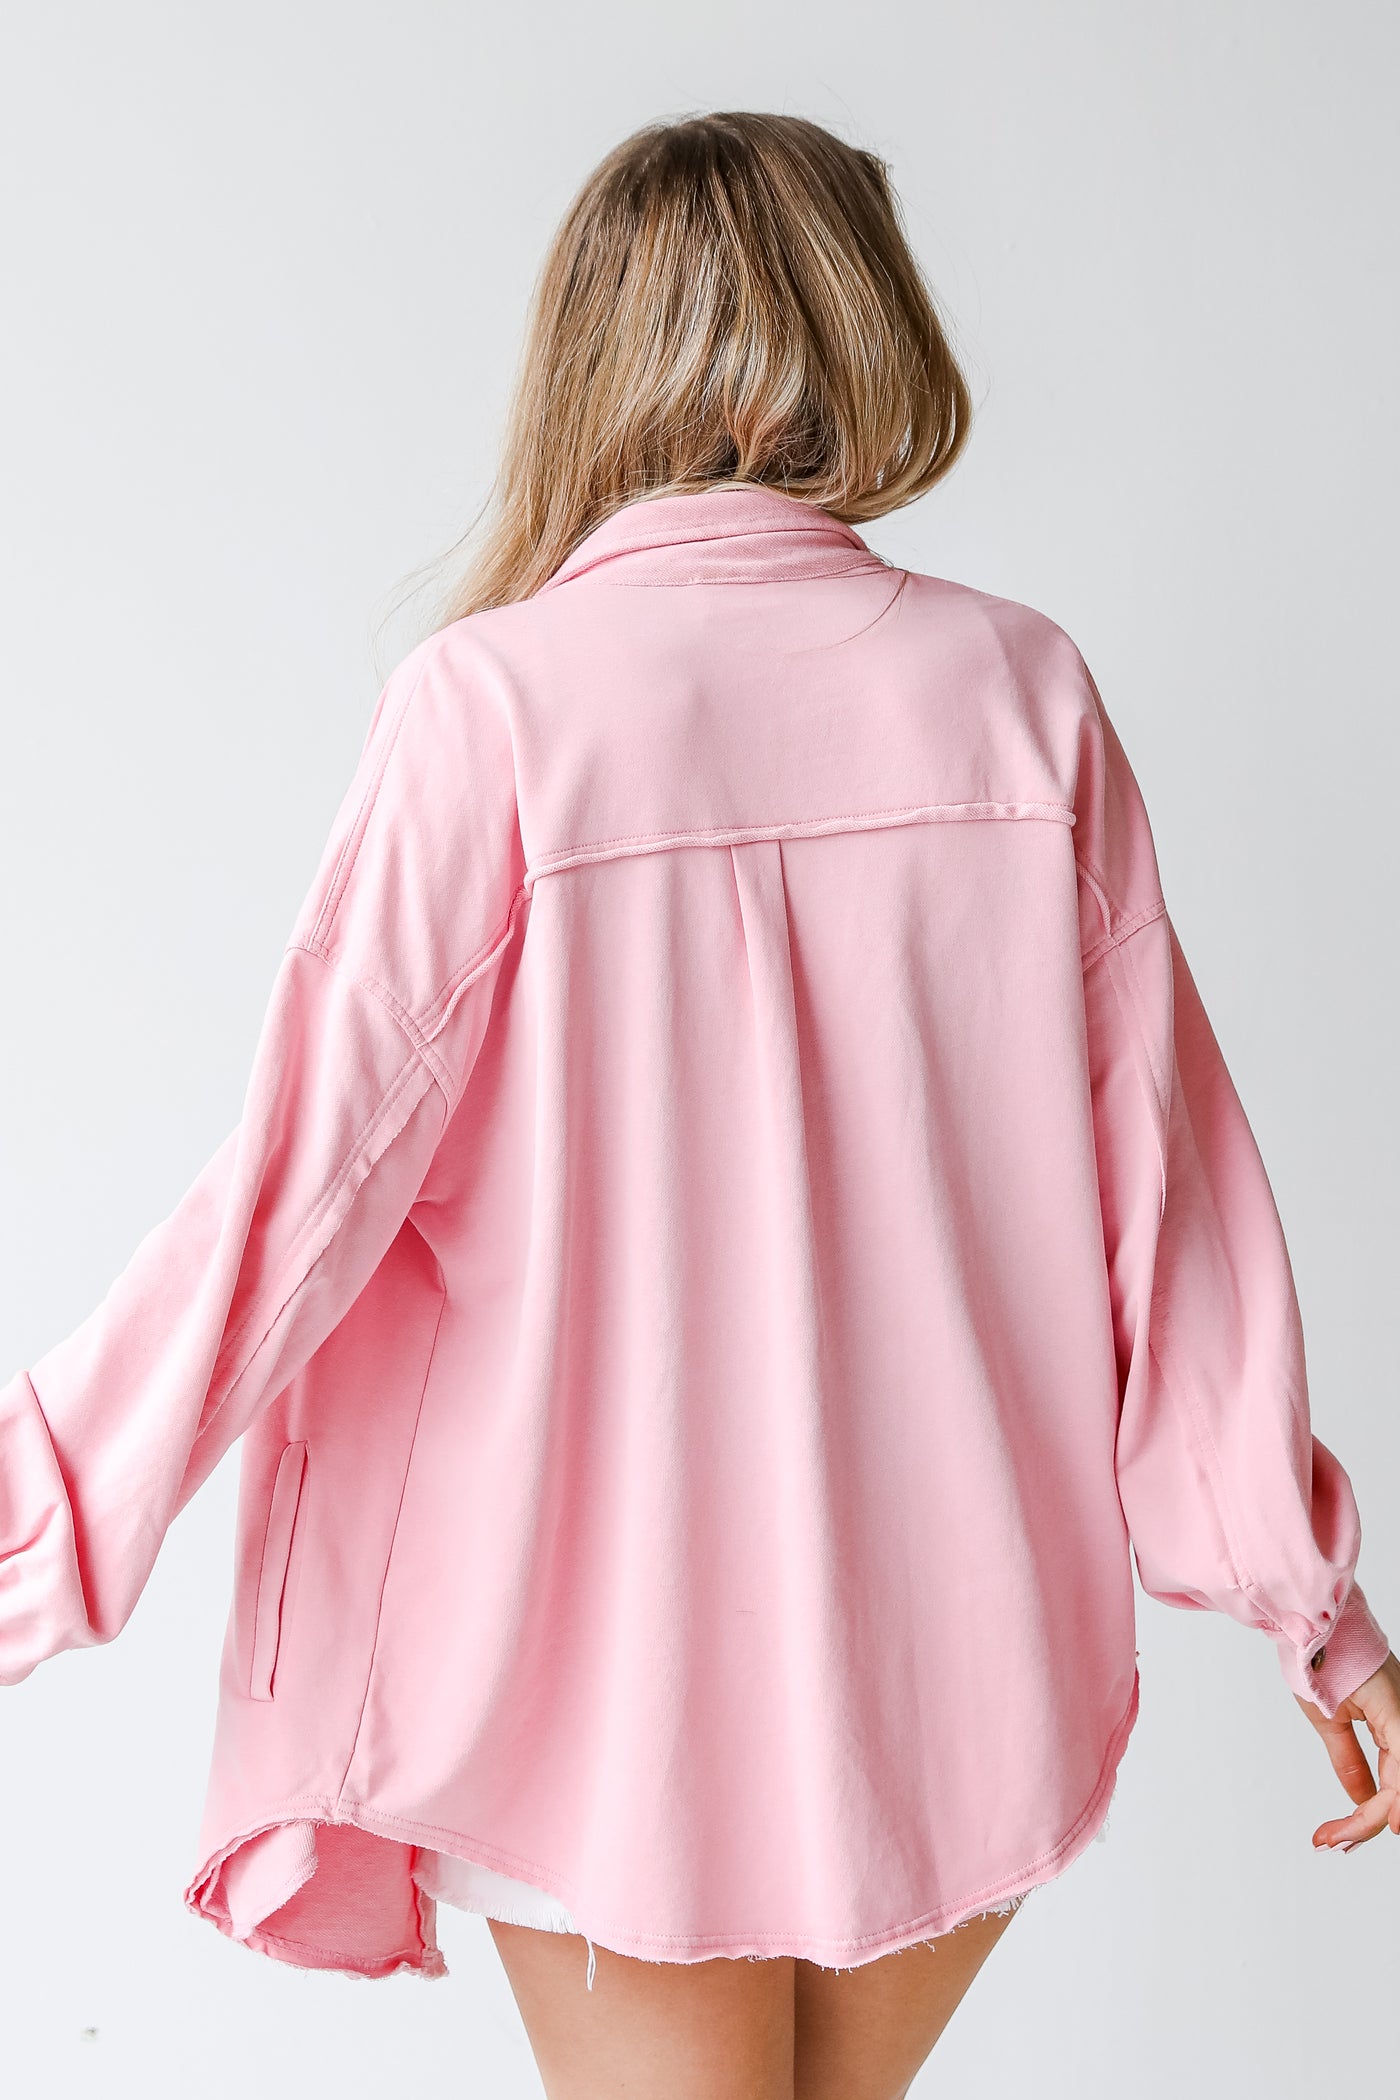 Shacket in pink back view